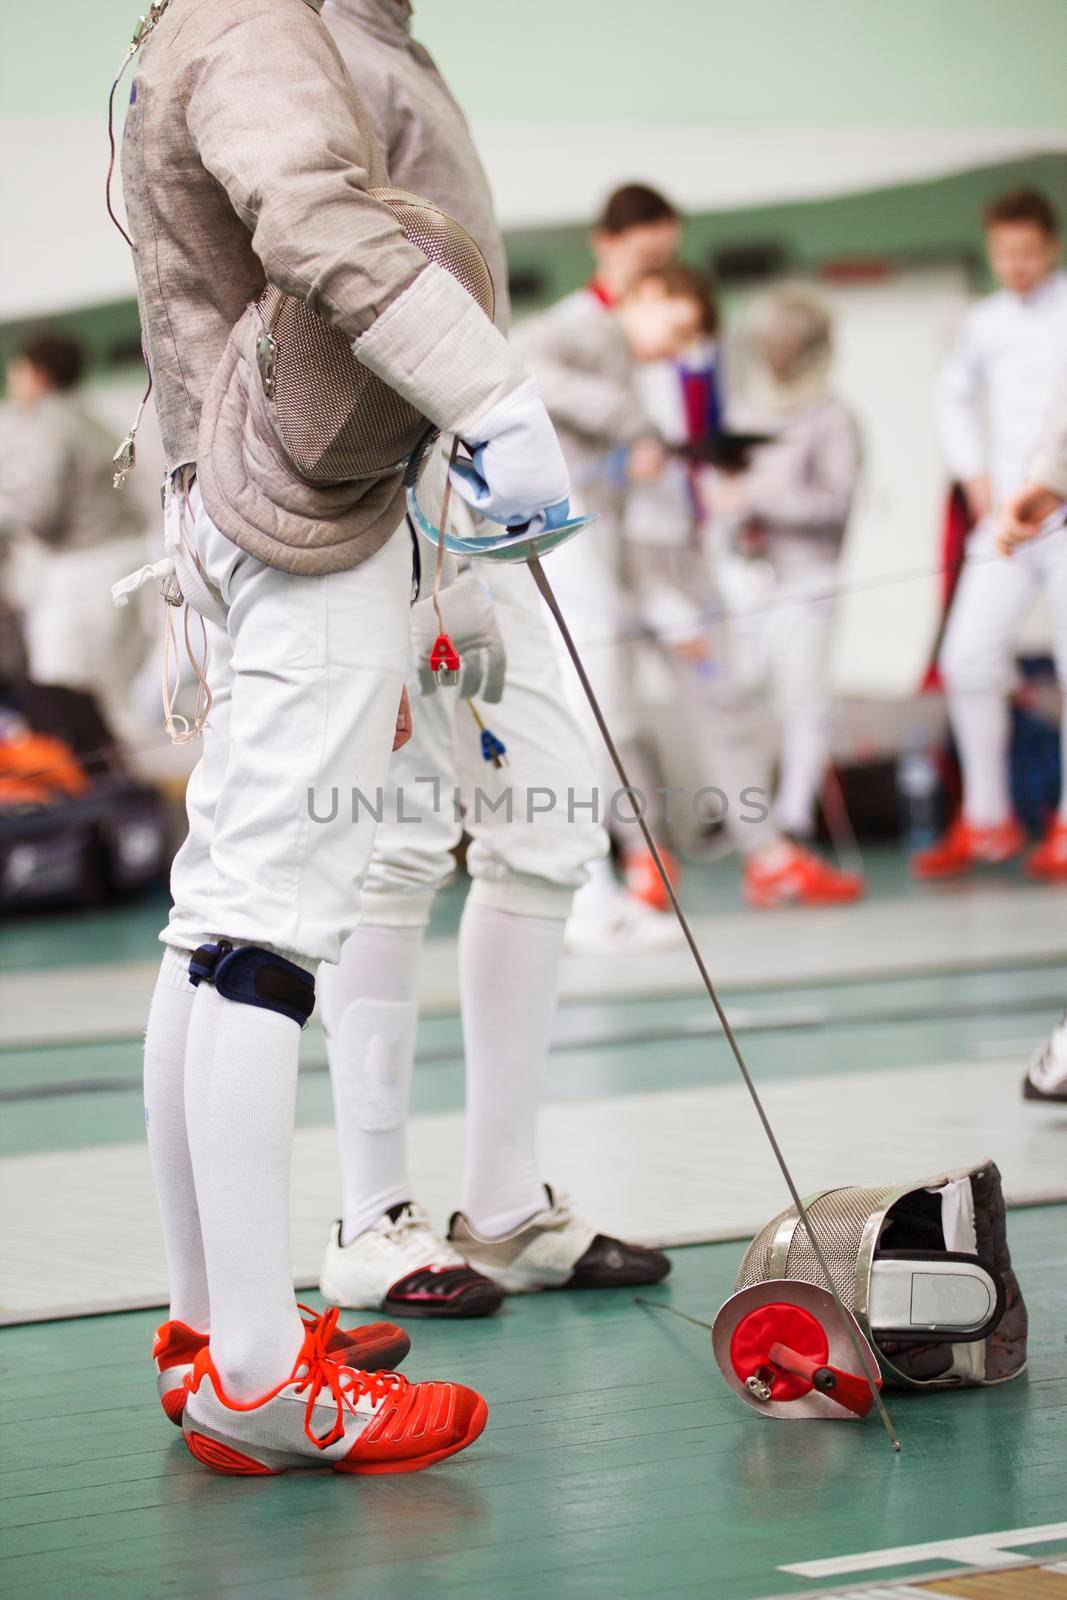 Fencer in white costume with rapier and protective mask on the floor in a fencing tournament, telephoto shot